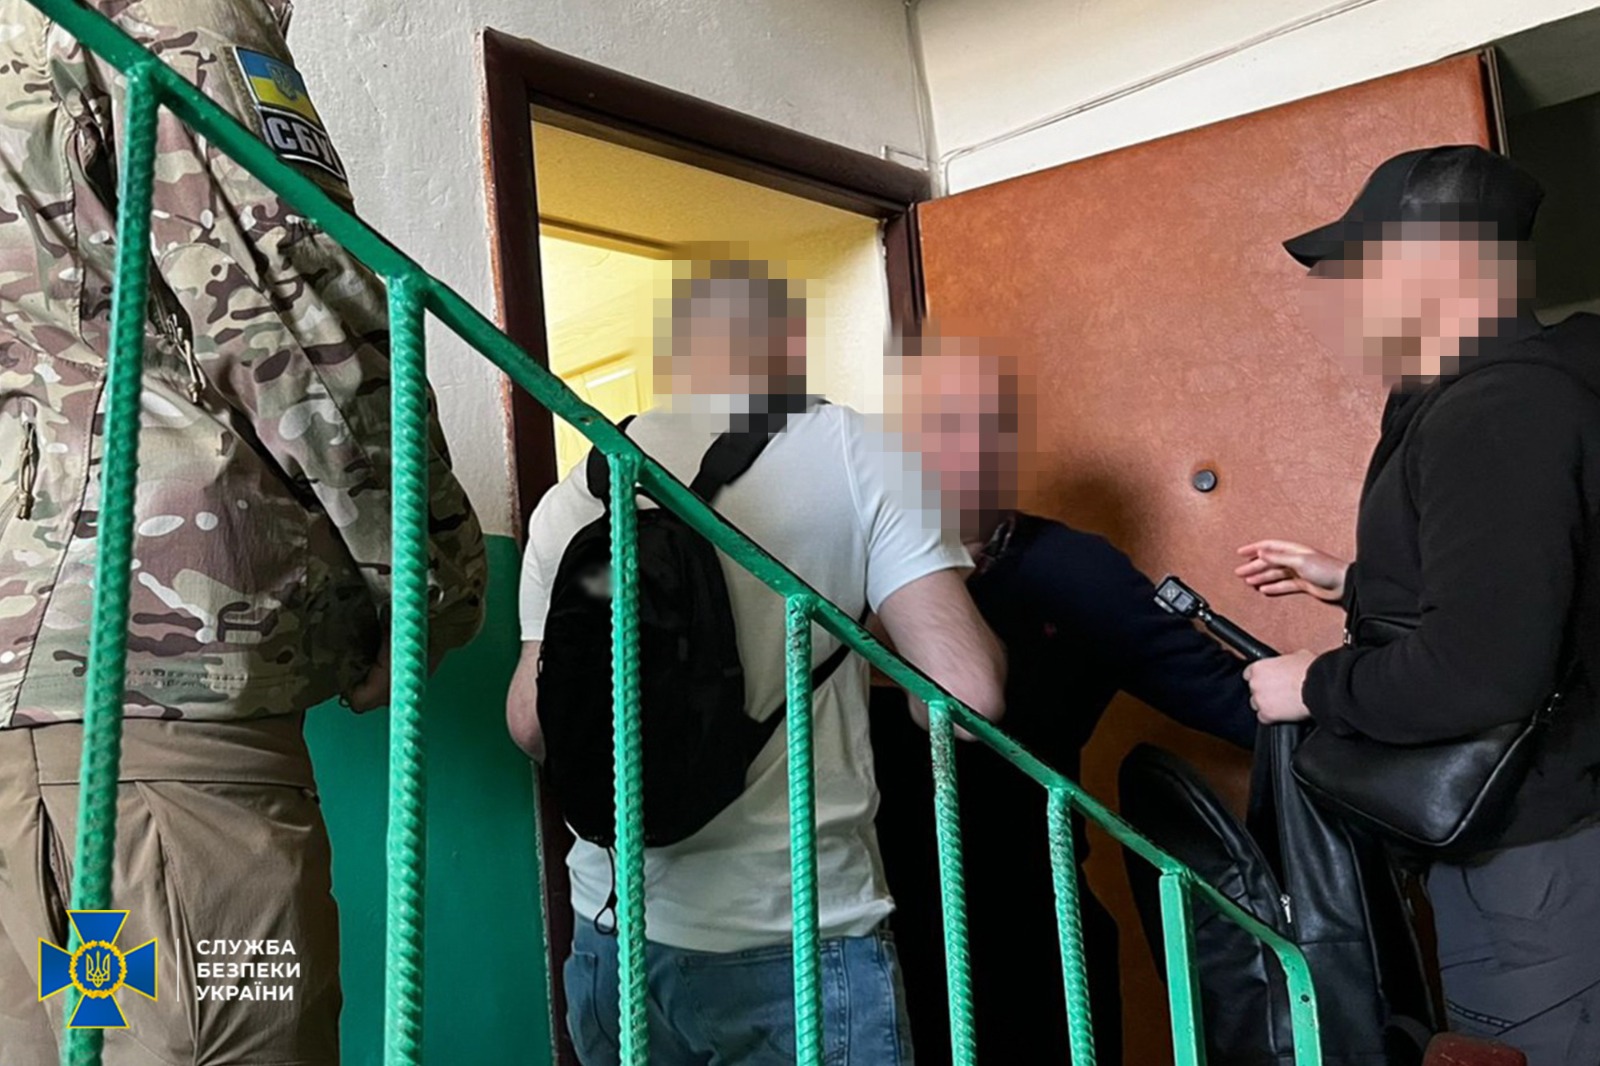 SBU neutralizes actions of 7 more Russian agitators for spreading pro-Kremlin content over social networks